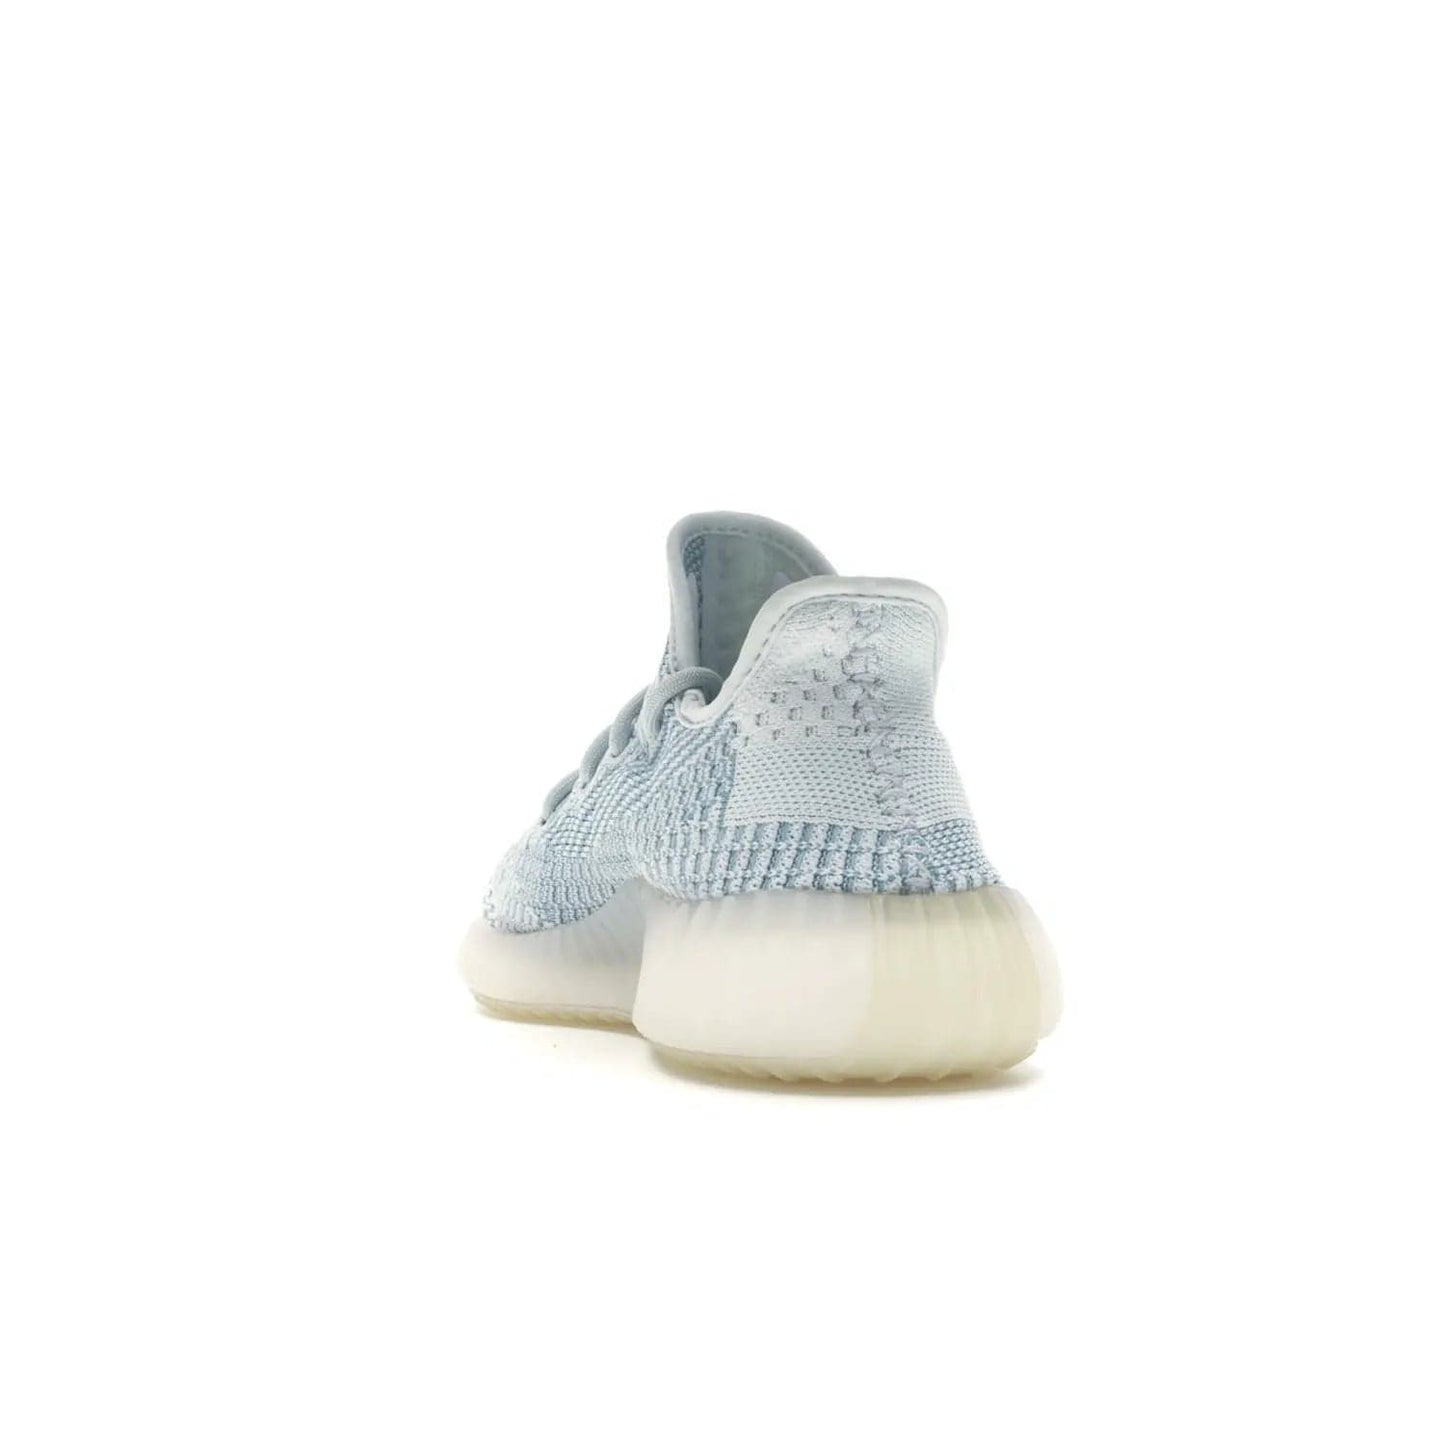 adidas Yeezy Boost 350 V2 Cloud White (Non-Reflective) - Image 26 - Only at www.BallersClubKickz.com - Uniquely designed adidas Yeezy Boost 350 V2 Cloud White (Non-Reflective) with a Primeknit upper in shades of cream and blue with a contrasting hard sole. A fashion-forward sneaker with a transparent strip and blue-and-white patterns.